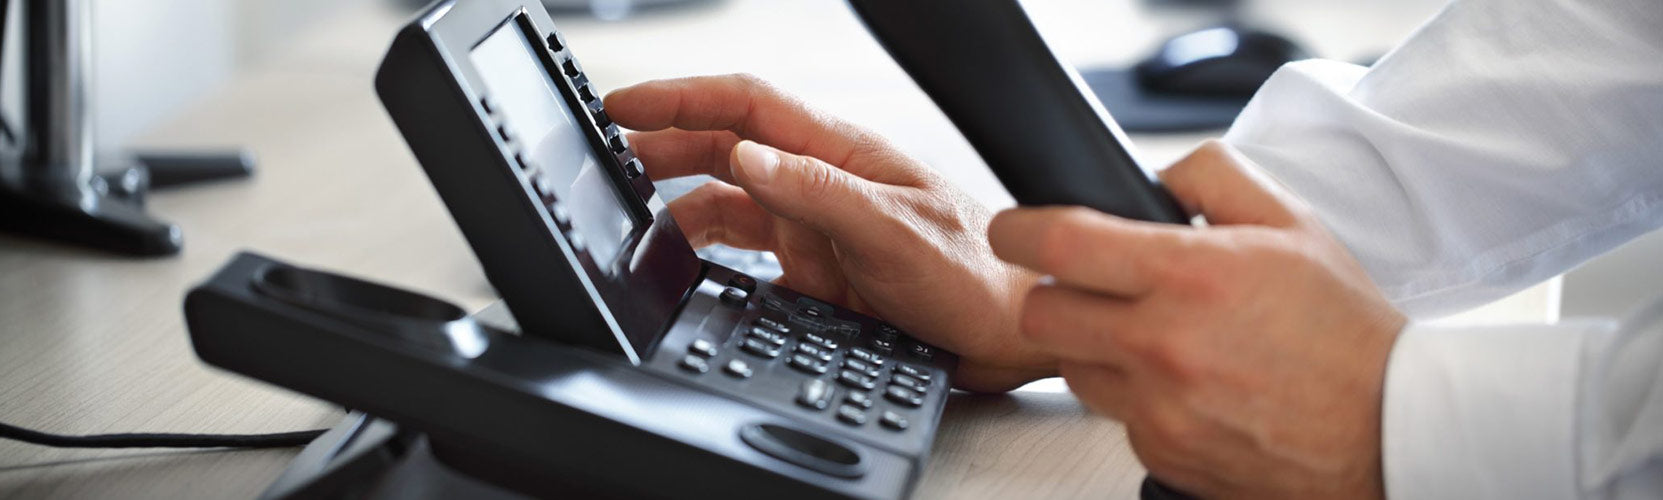 The Benefits of Using VOIP Phone Systems